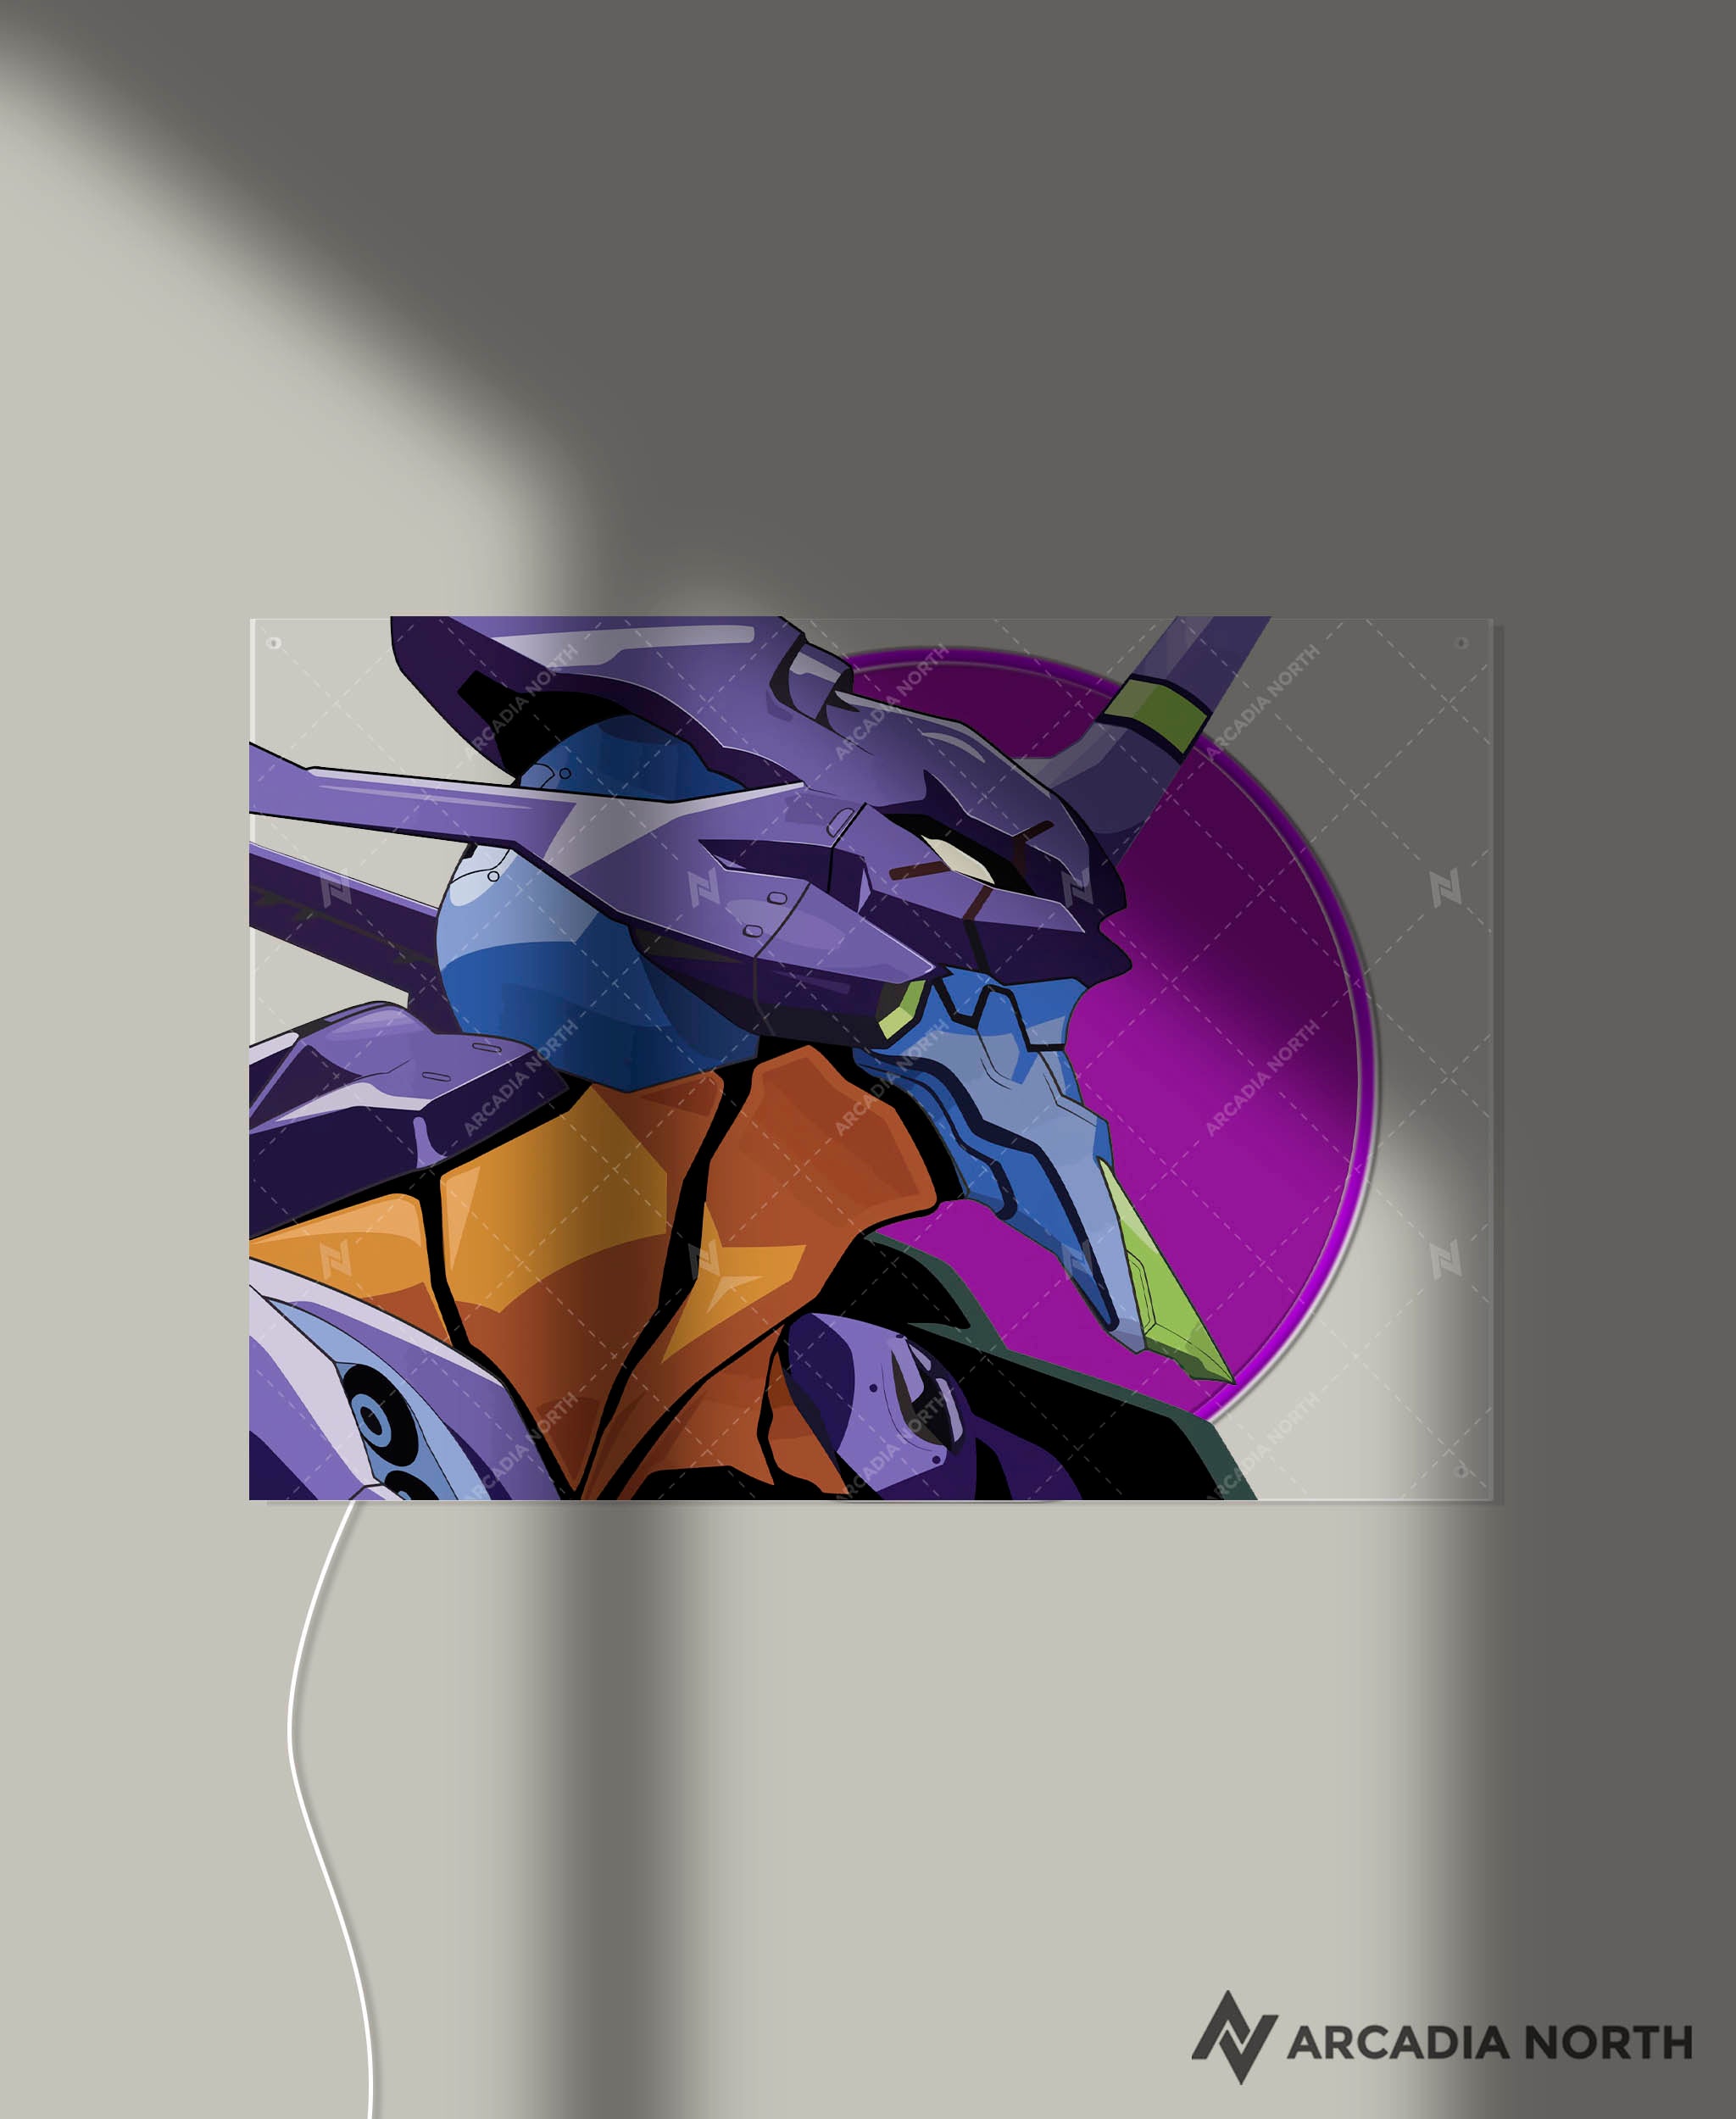 Arcadia North AURALIGHT - an LED Poster featuring the anime Neon Genesis Evangelion with Evangelion Unit-01 or Eva-01 illuminated by glowing neon LED lights. UV-printed on acrylic.